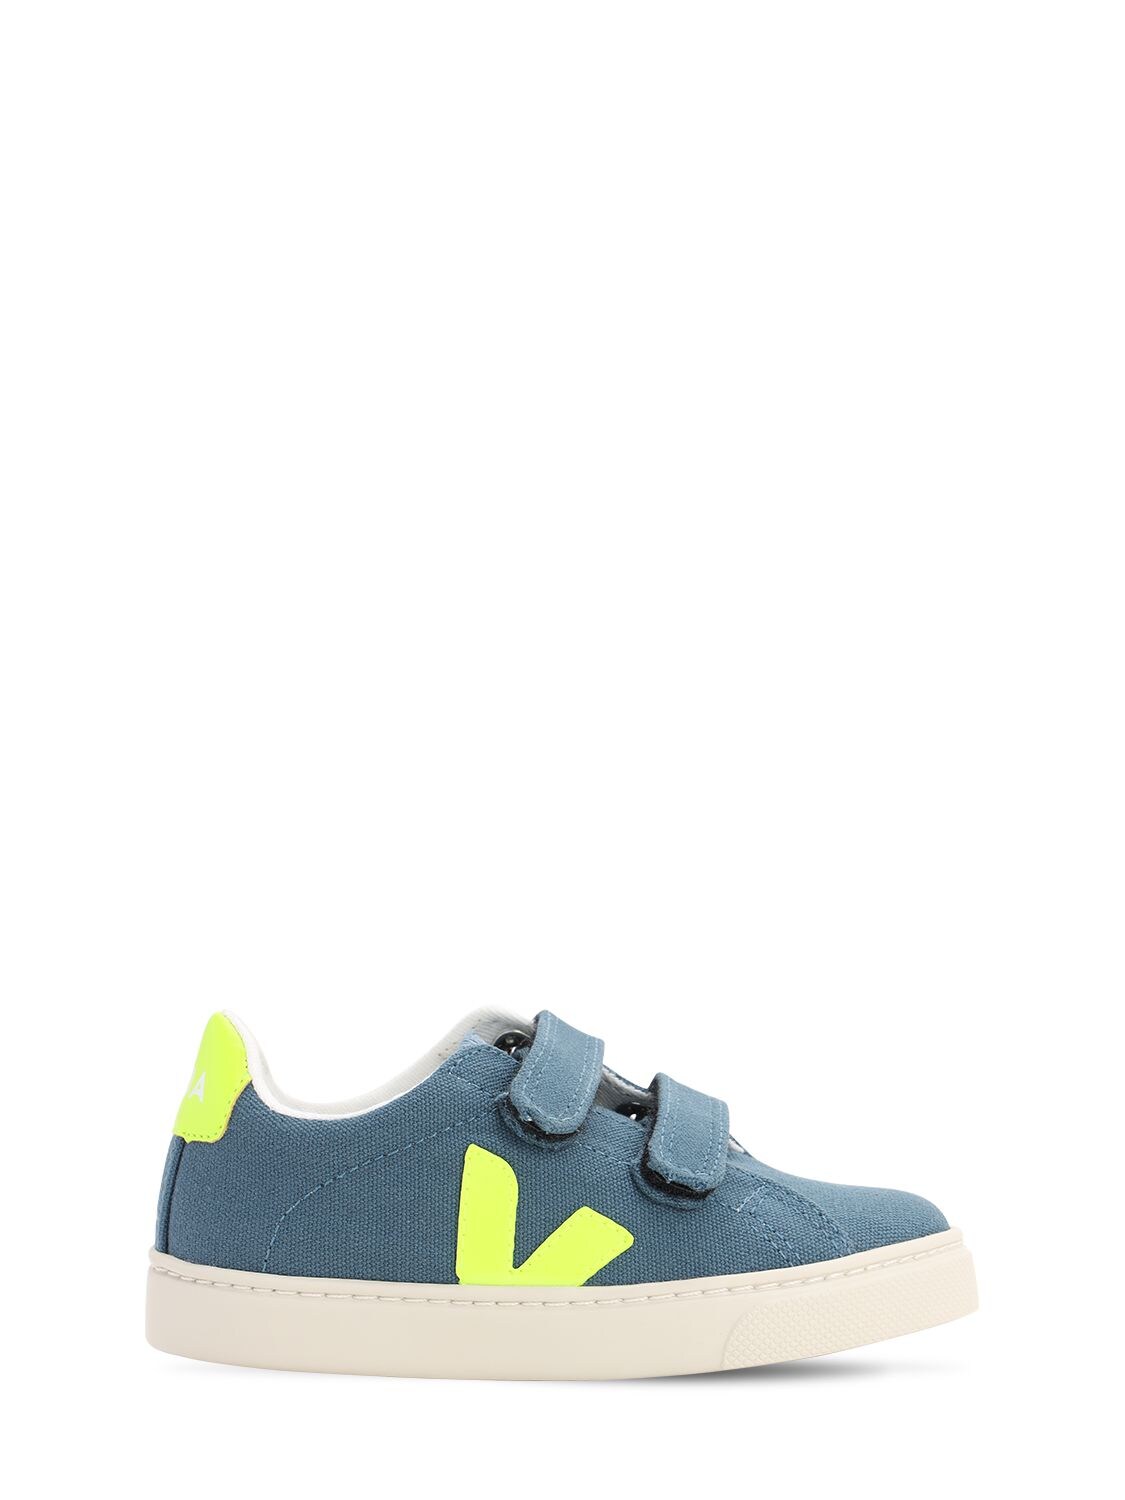 Veja Kids' Organic Cotton Canvas Strap Sneakers In Blue